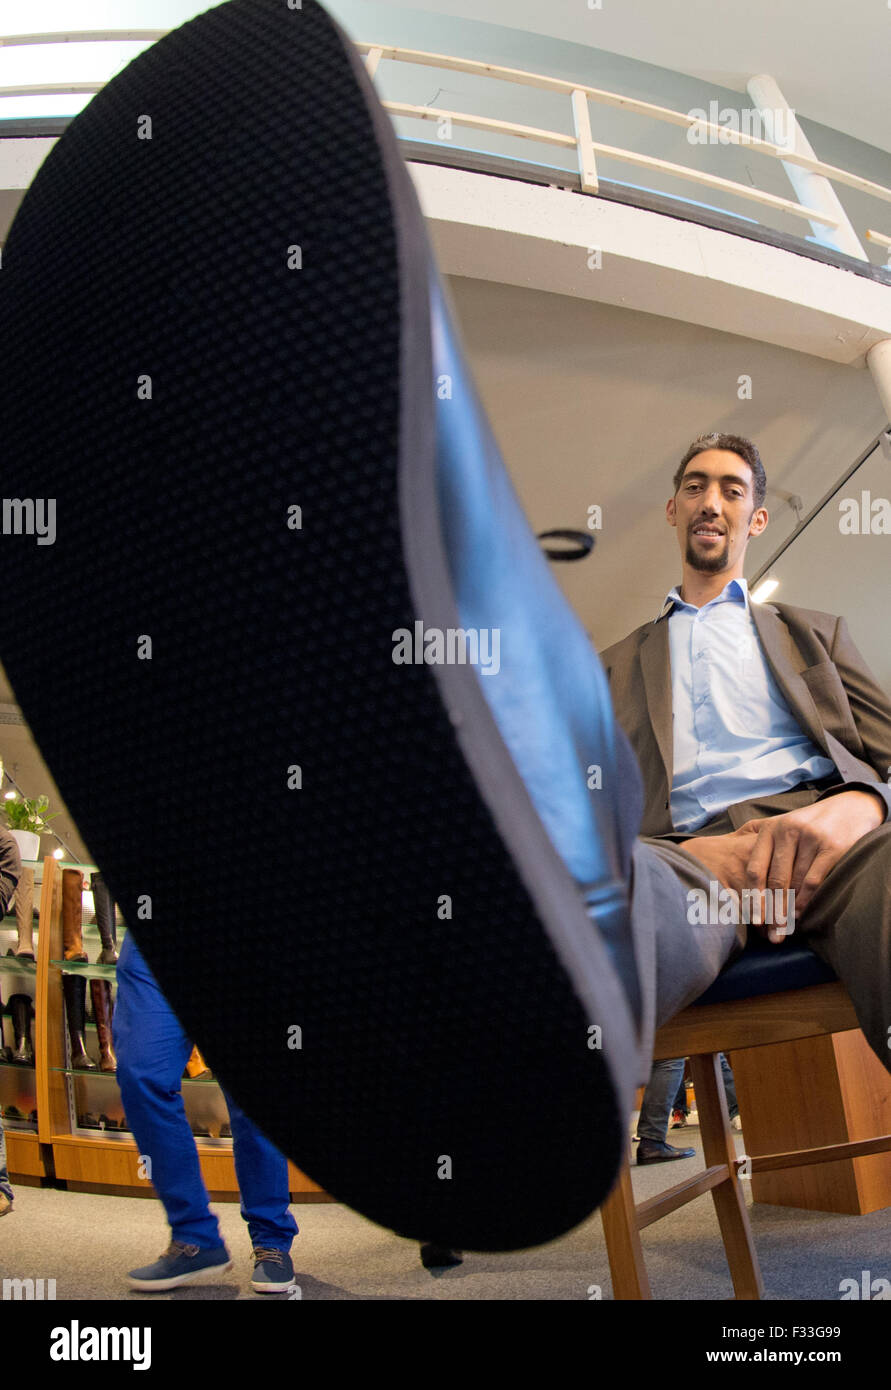 Sultan Koesen, the world's tallest person at 2.51 metres, shows off his new shoes in Vreden, Germany, 29 September 2015. He wears custom-made size 60 footwear made by Wessels shoemakers, who cater specially for extra-large feet. PHOTO: FRISO GENTSCH/DPA Stock Photo